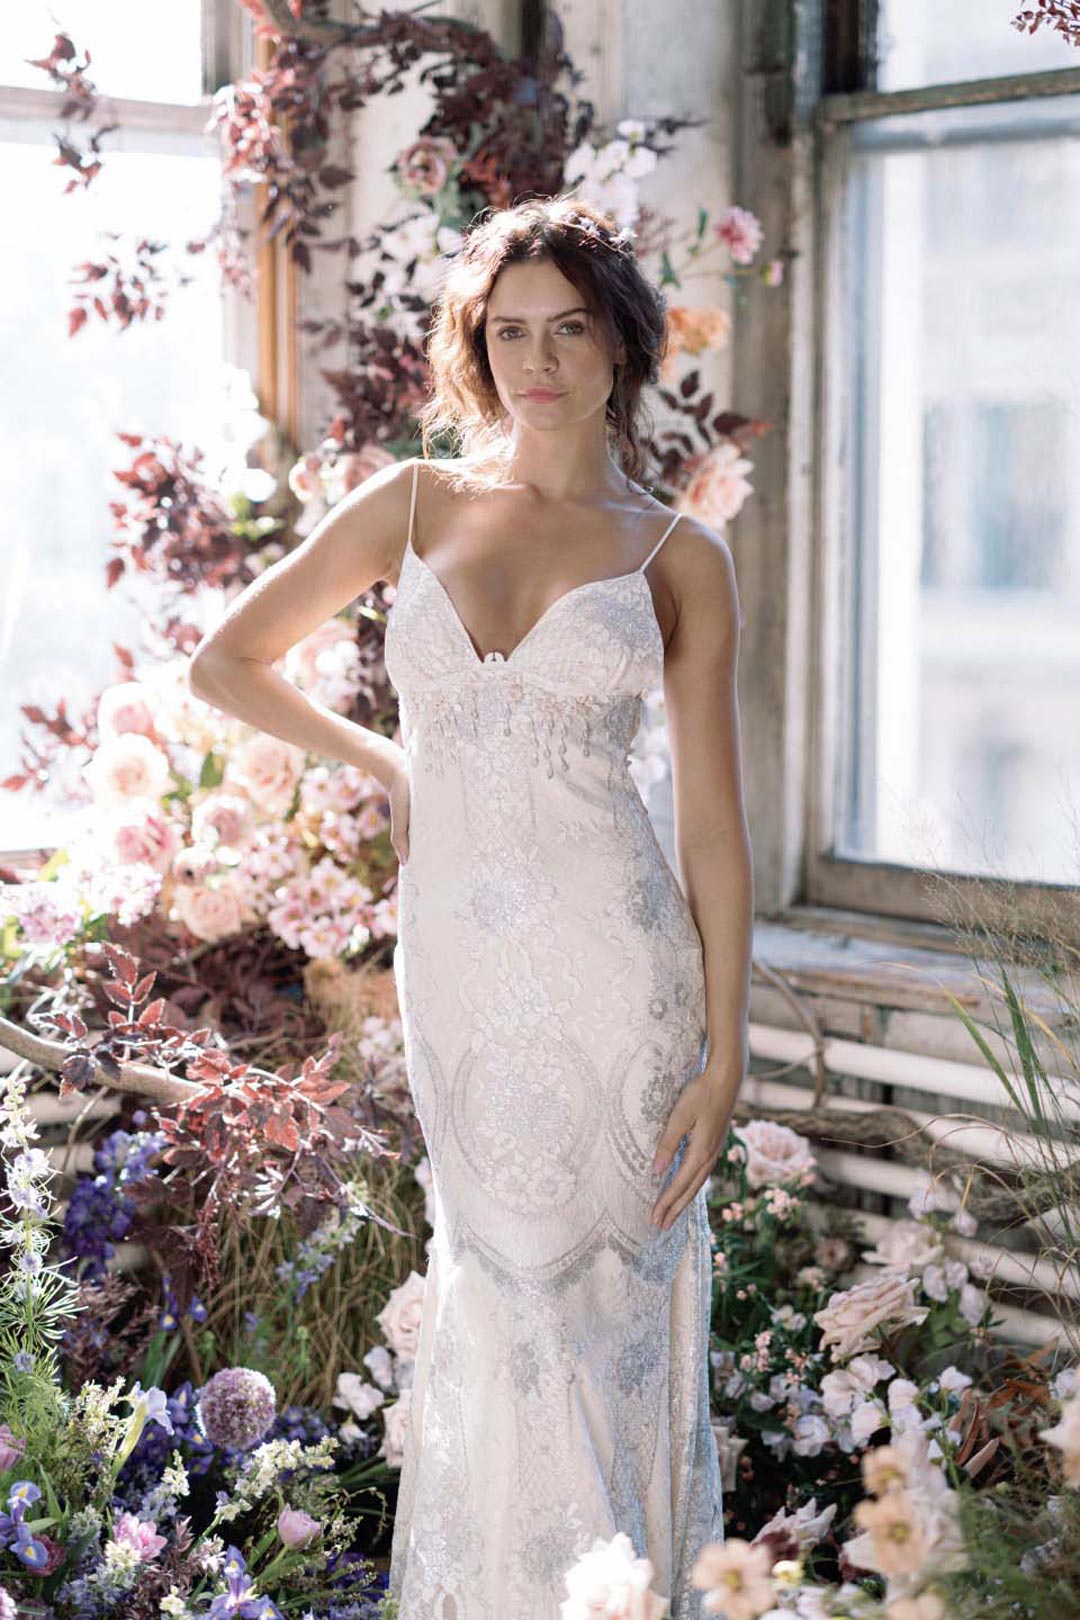 Briolette Wedding Dress with Sliver and Ivory Lace